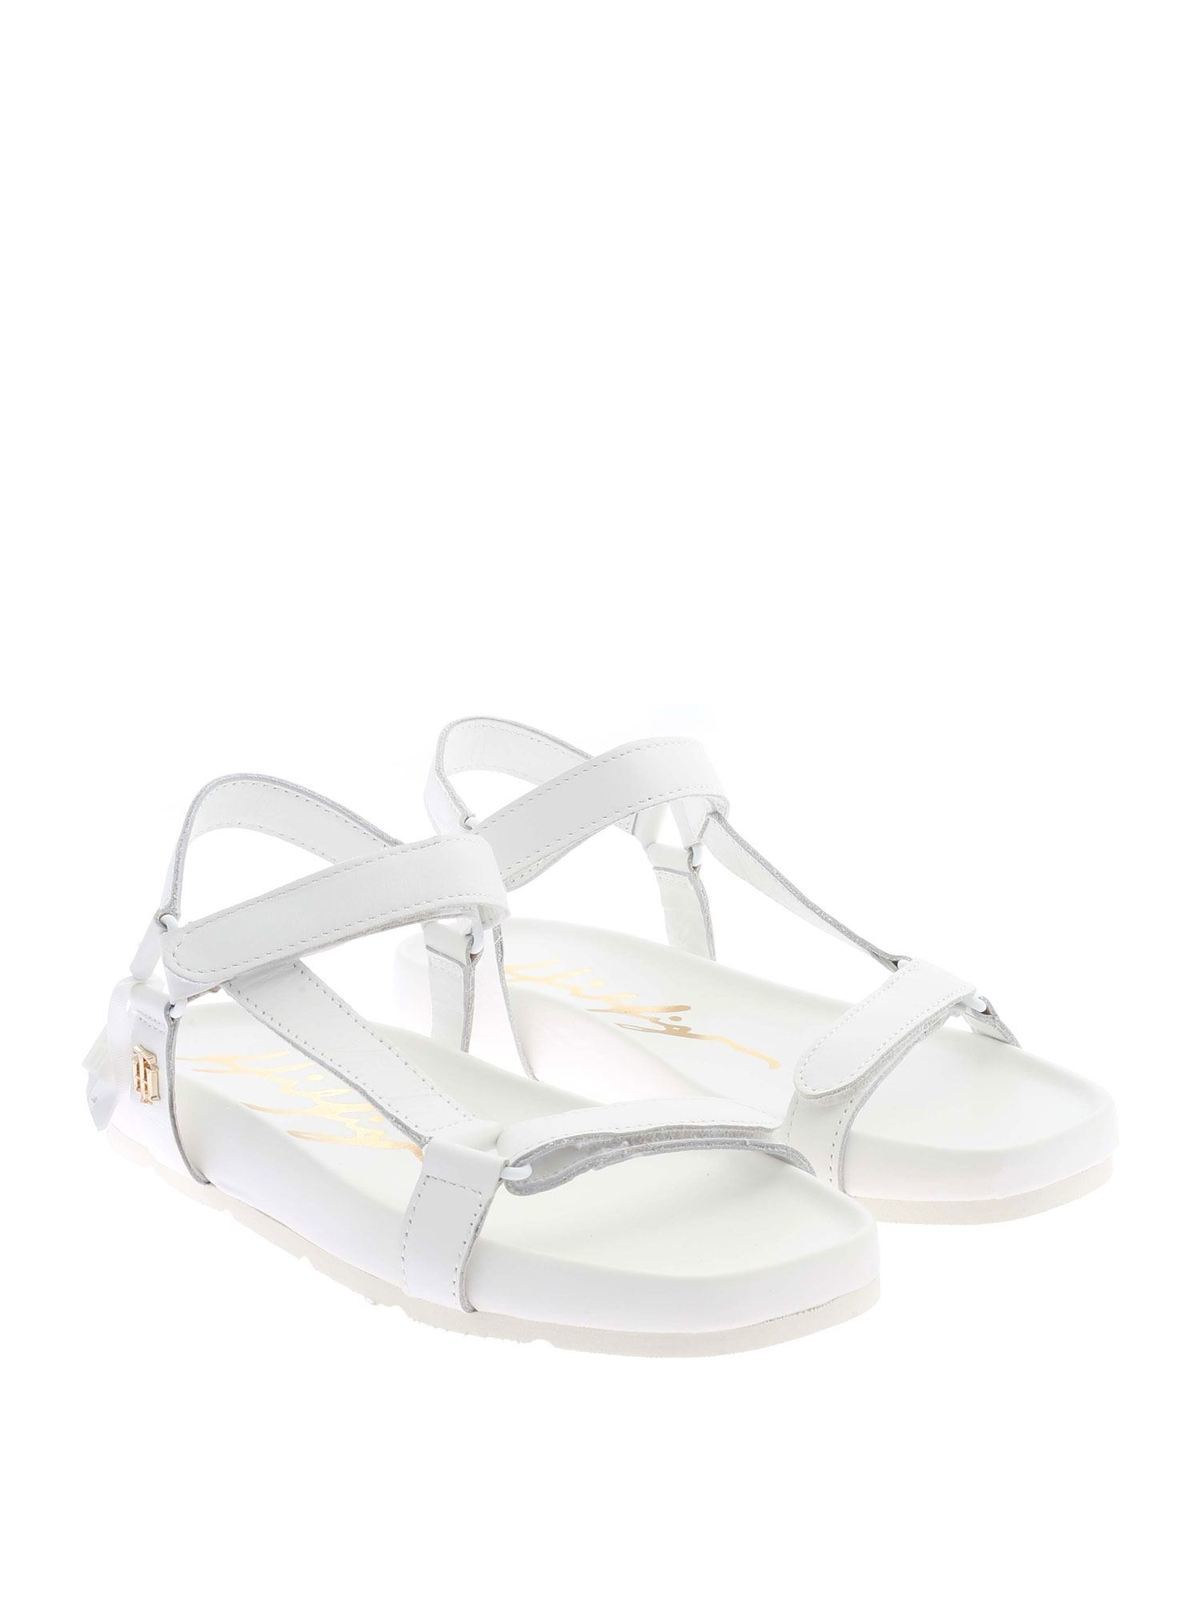 Sandals Tommy Hilfiger - sandals in white - FW0FW05623YBL